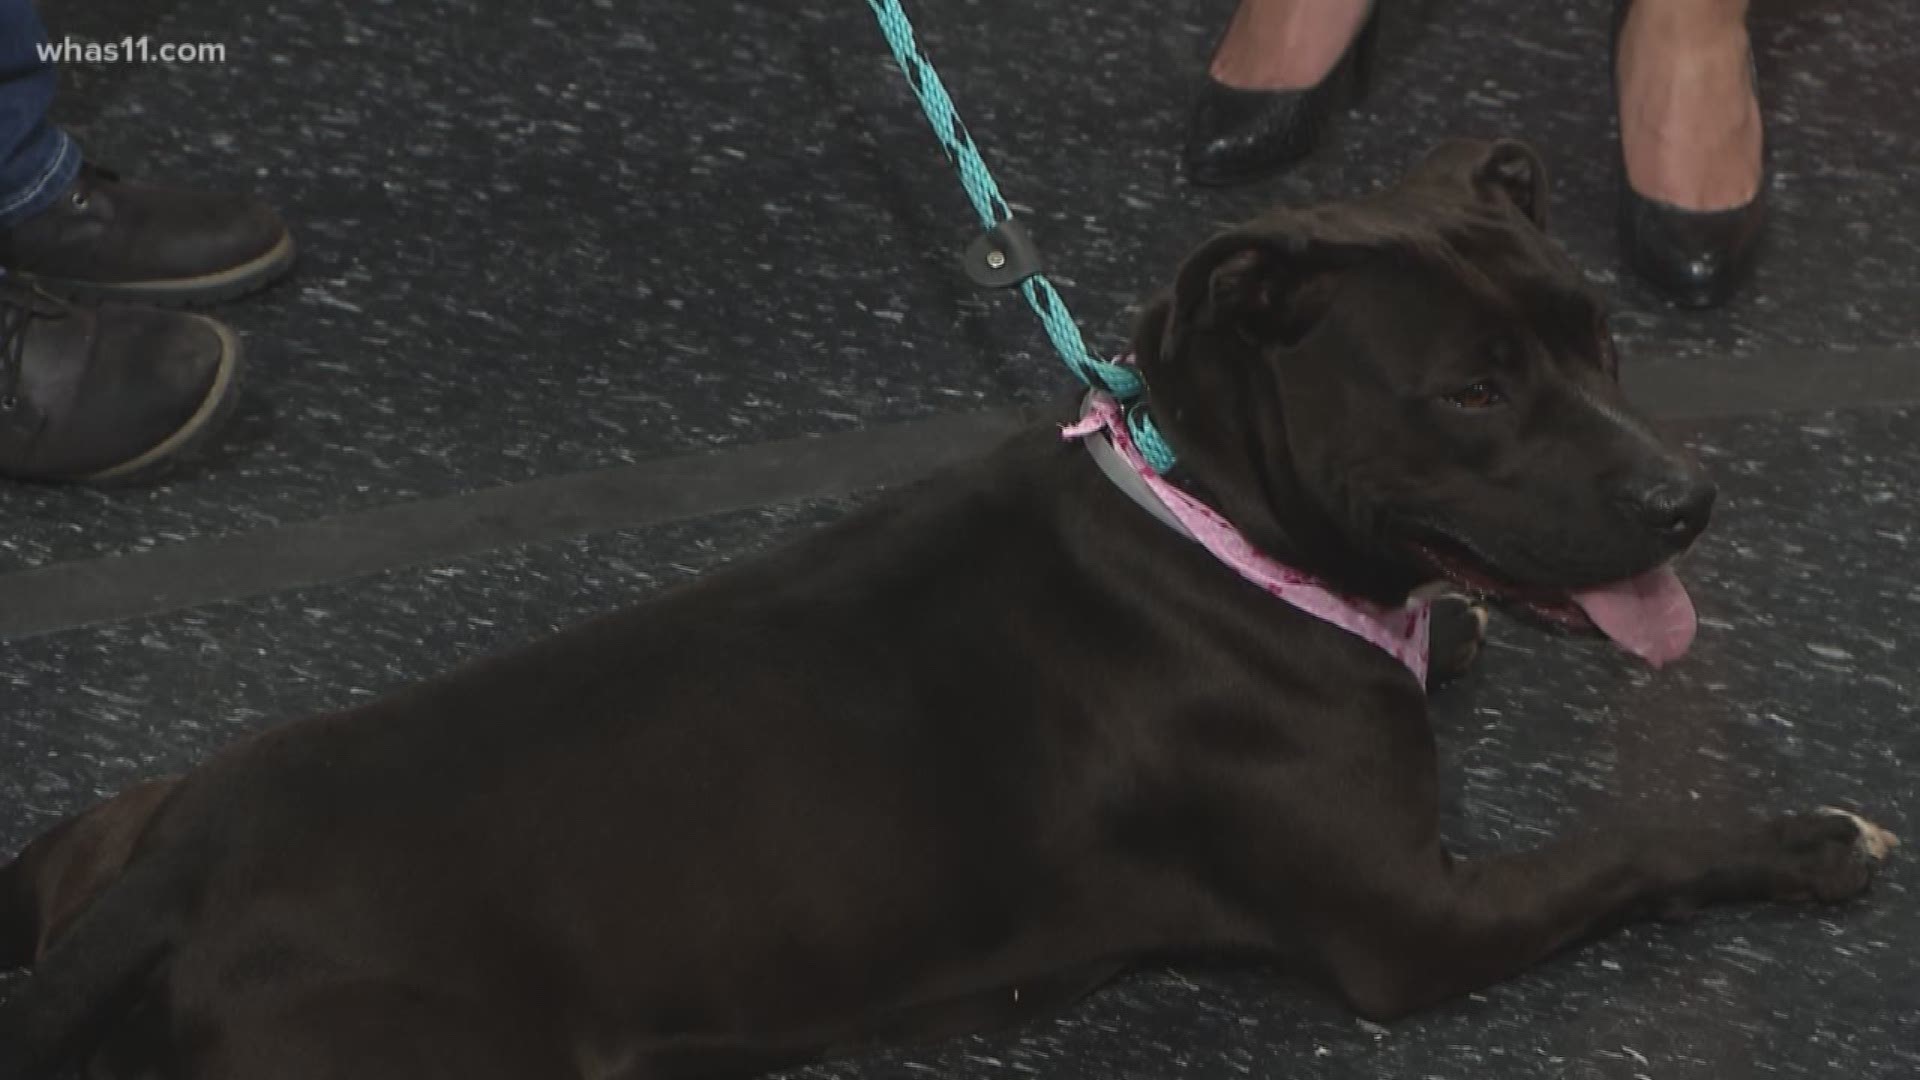 Pet of the Week: Help LMAS find this dog a forever home!